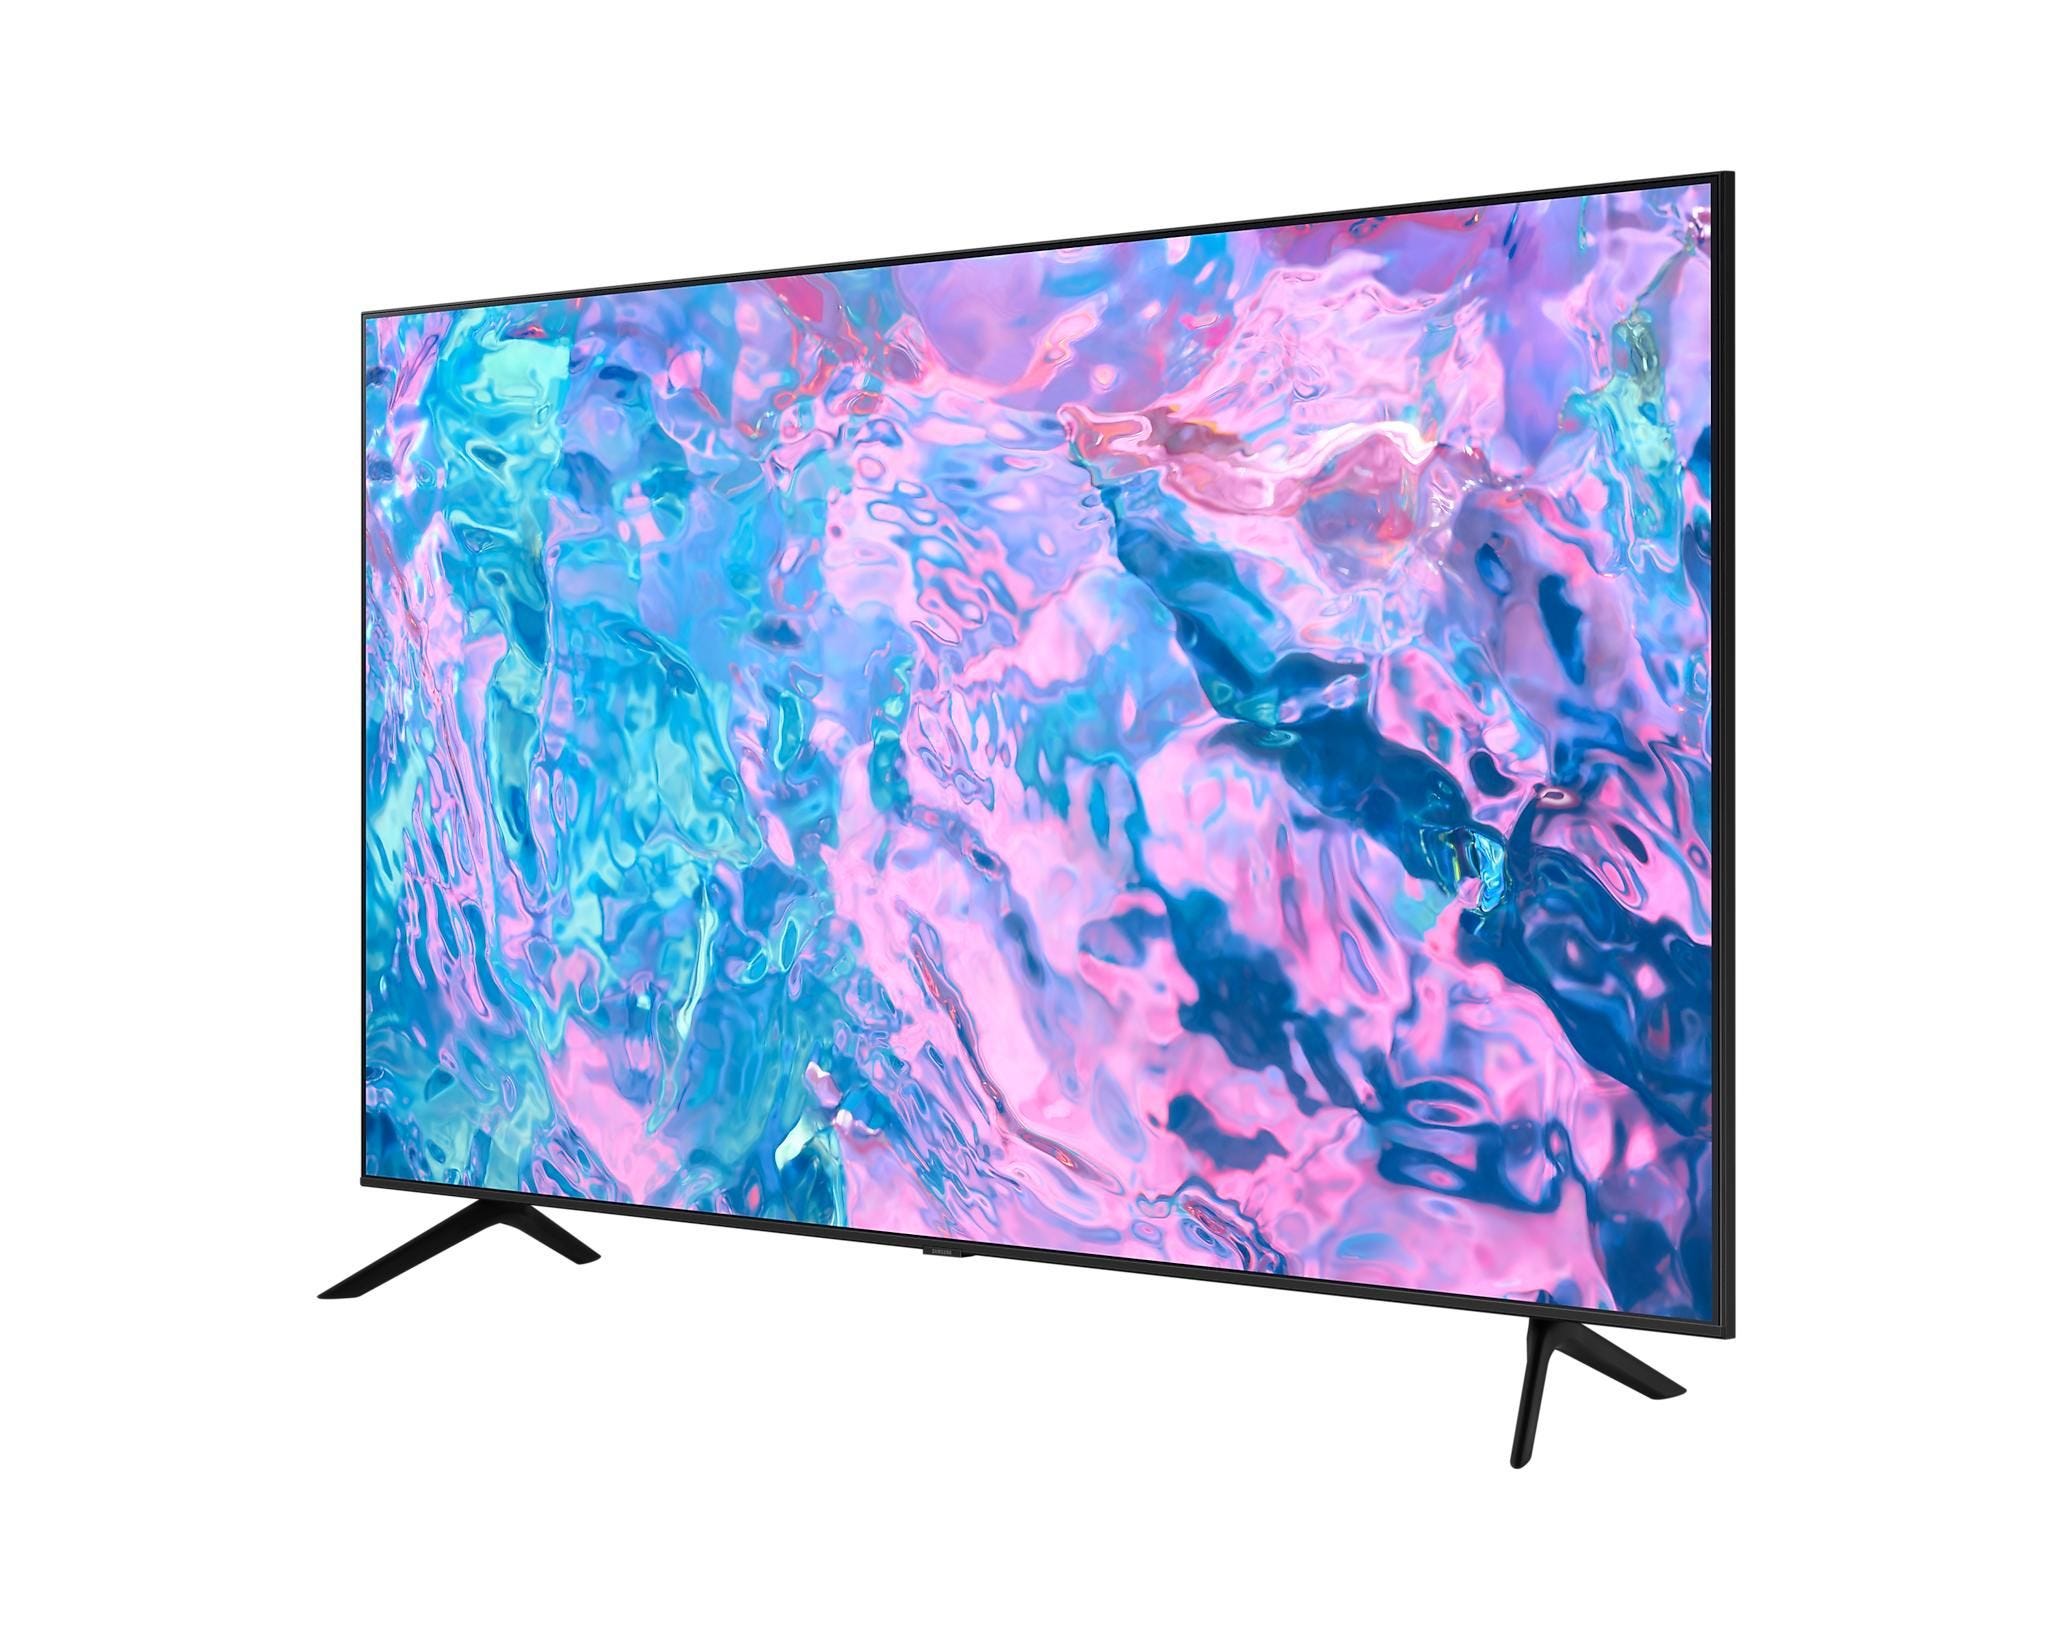 Samsung 75 Inch 4K UHD Smart LED TV with Built In Receiver - UA75CU7000